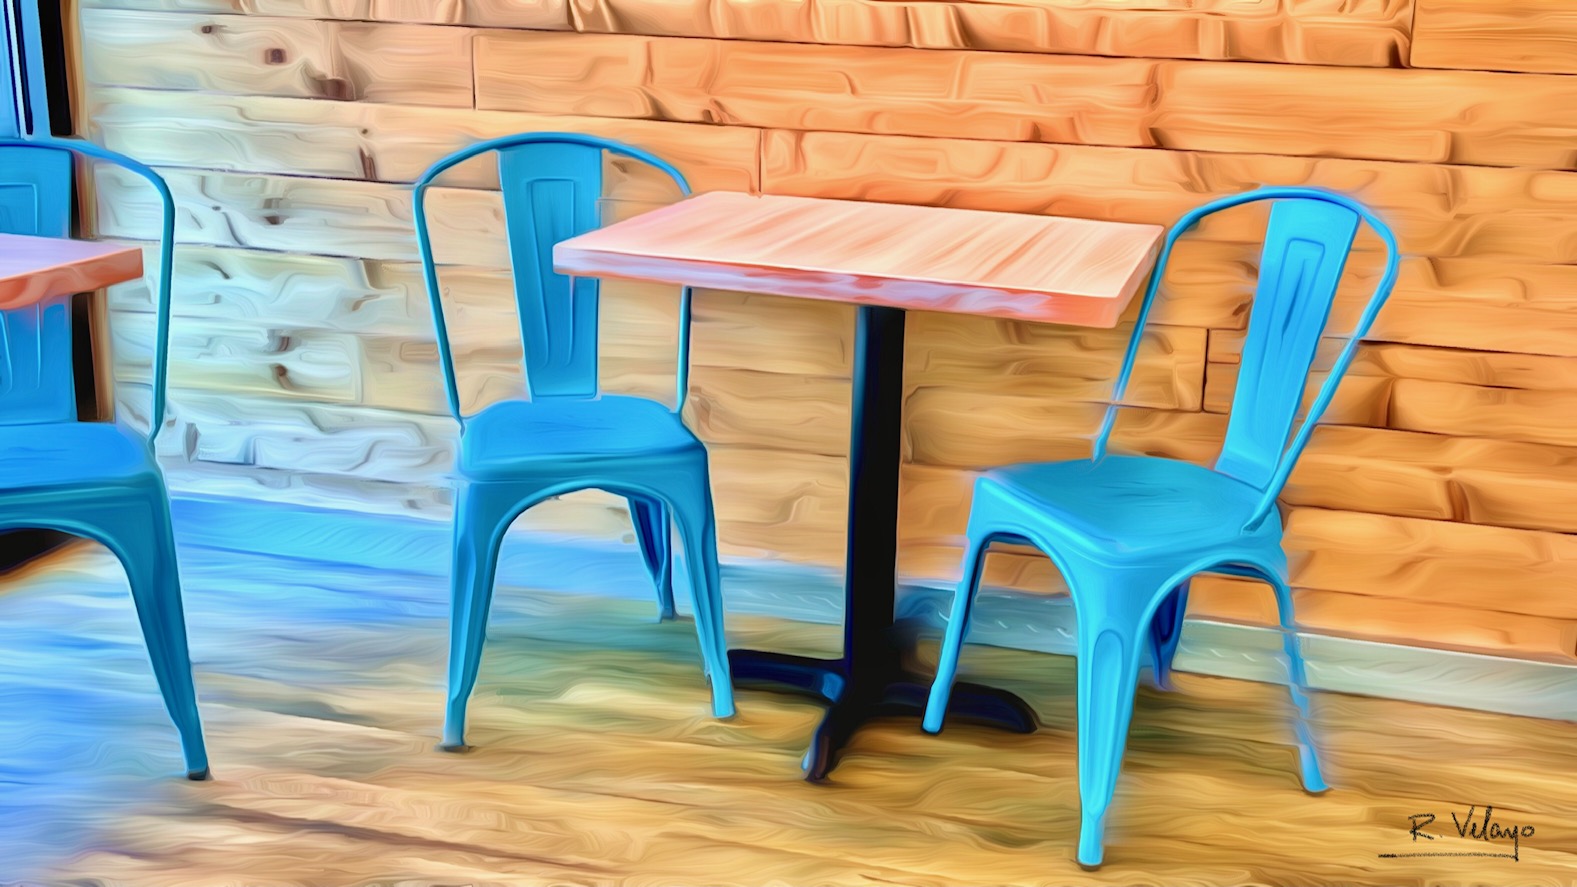 "BRIGHT BLUE BISTRO CHAIRS" [Created: 10/08/2022]